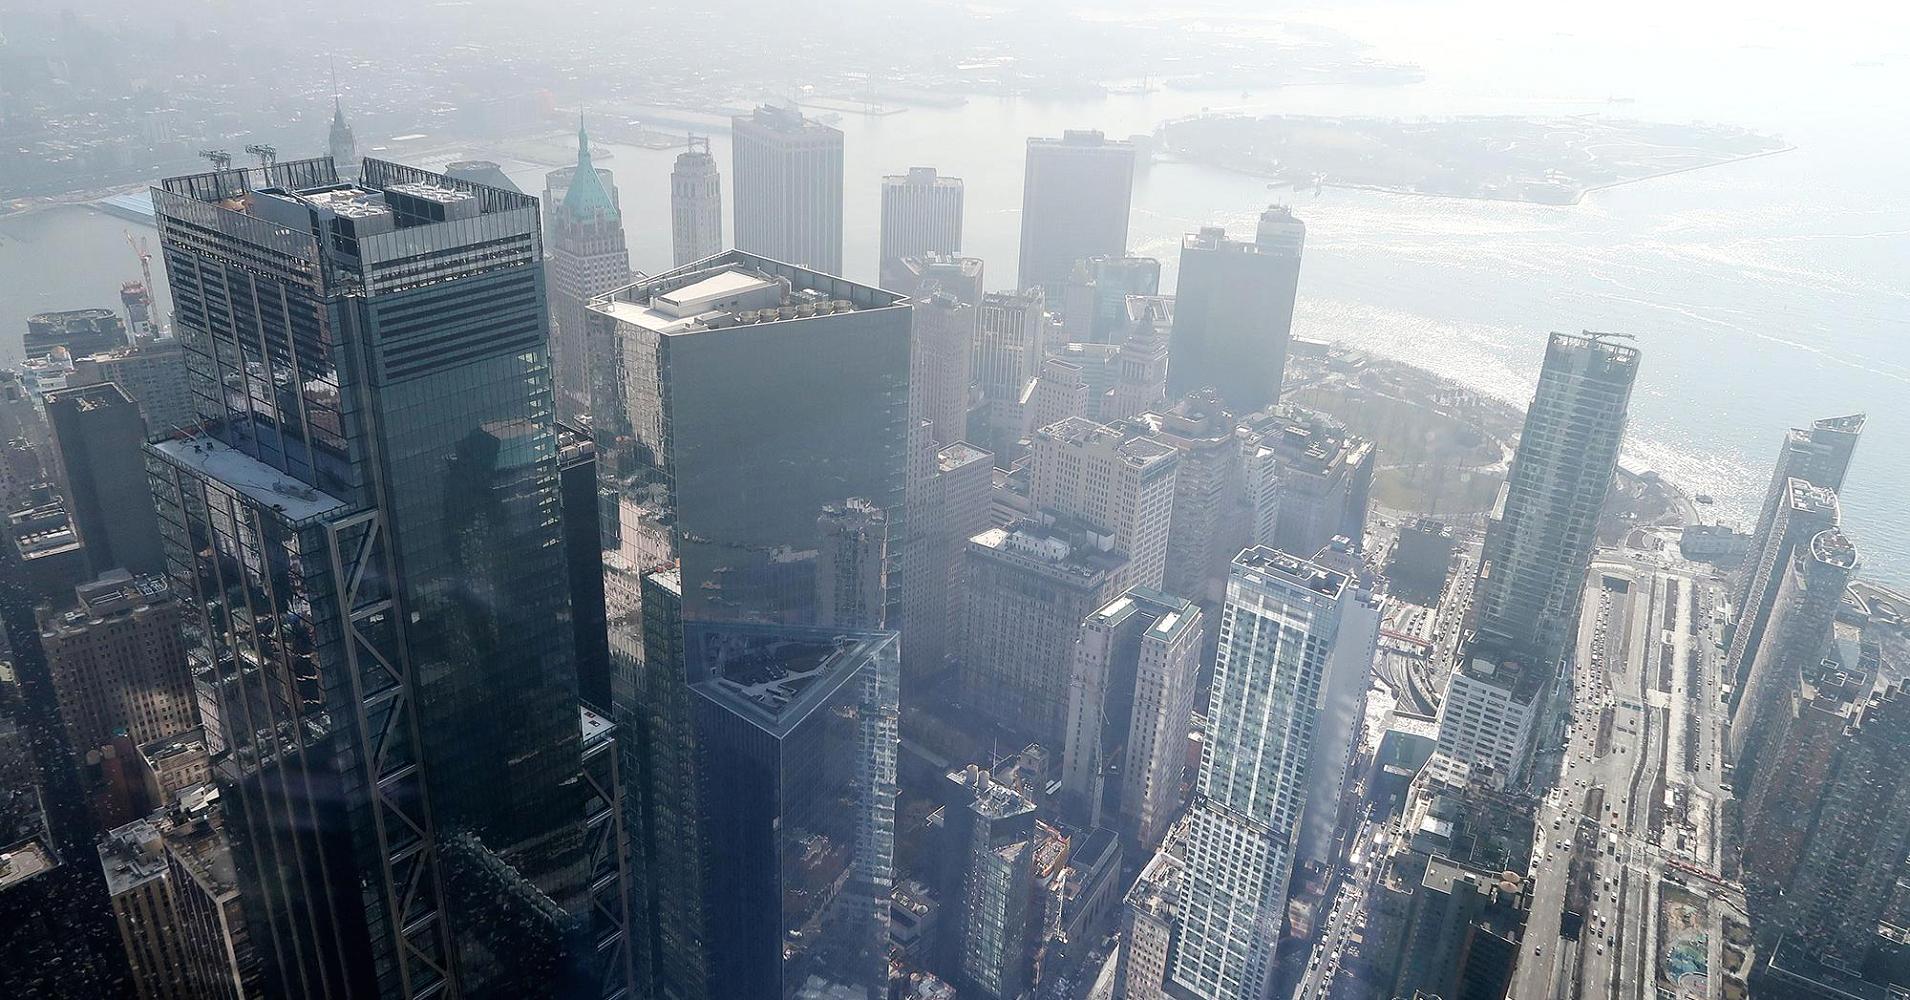 New 3 World Trade Center to mark another step in NYC's downtown revival